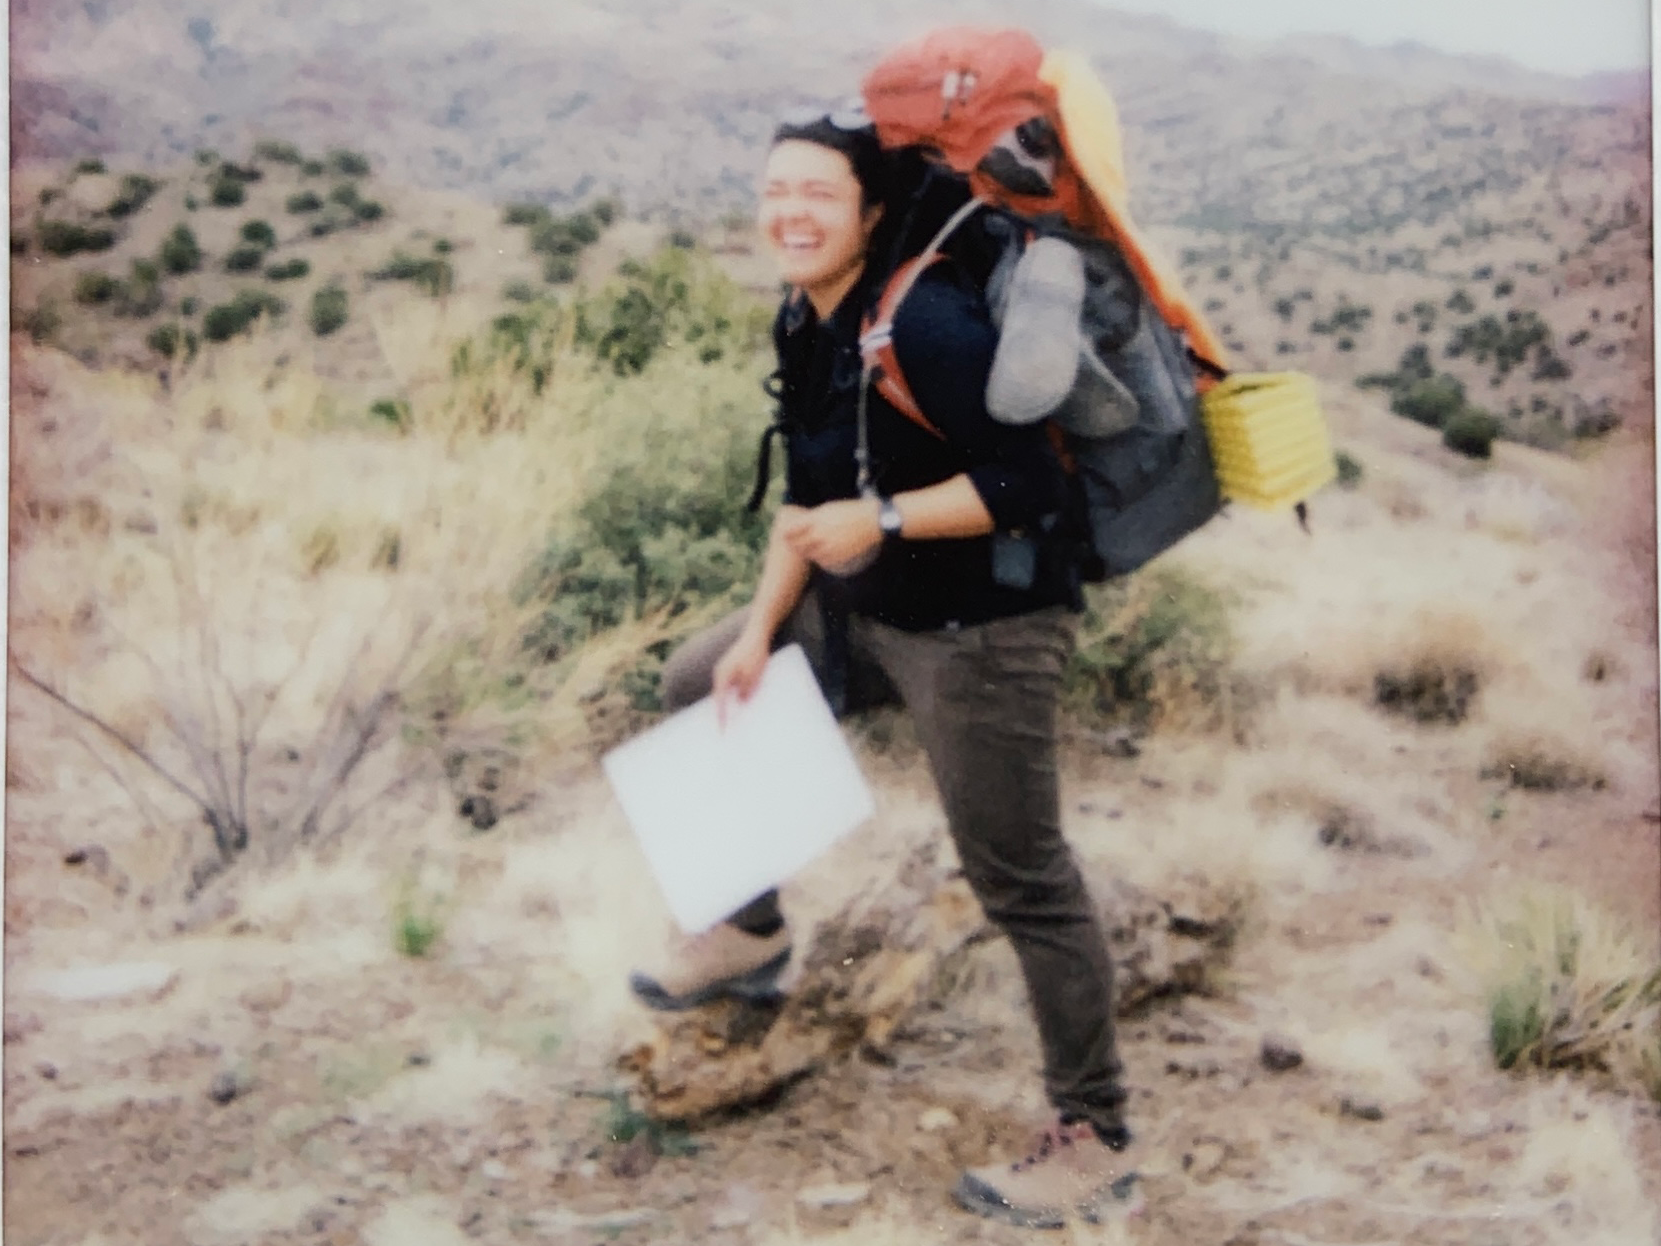 The author is smiling with her backpack on as the holds a map to navigate the desert terrain.